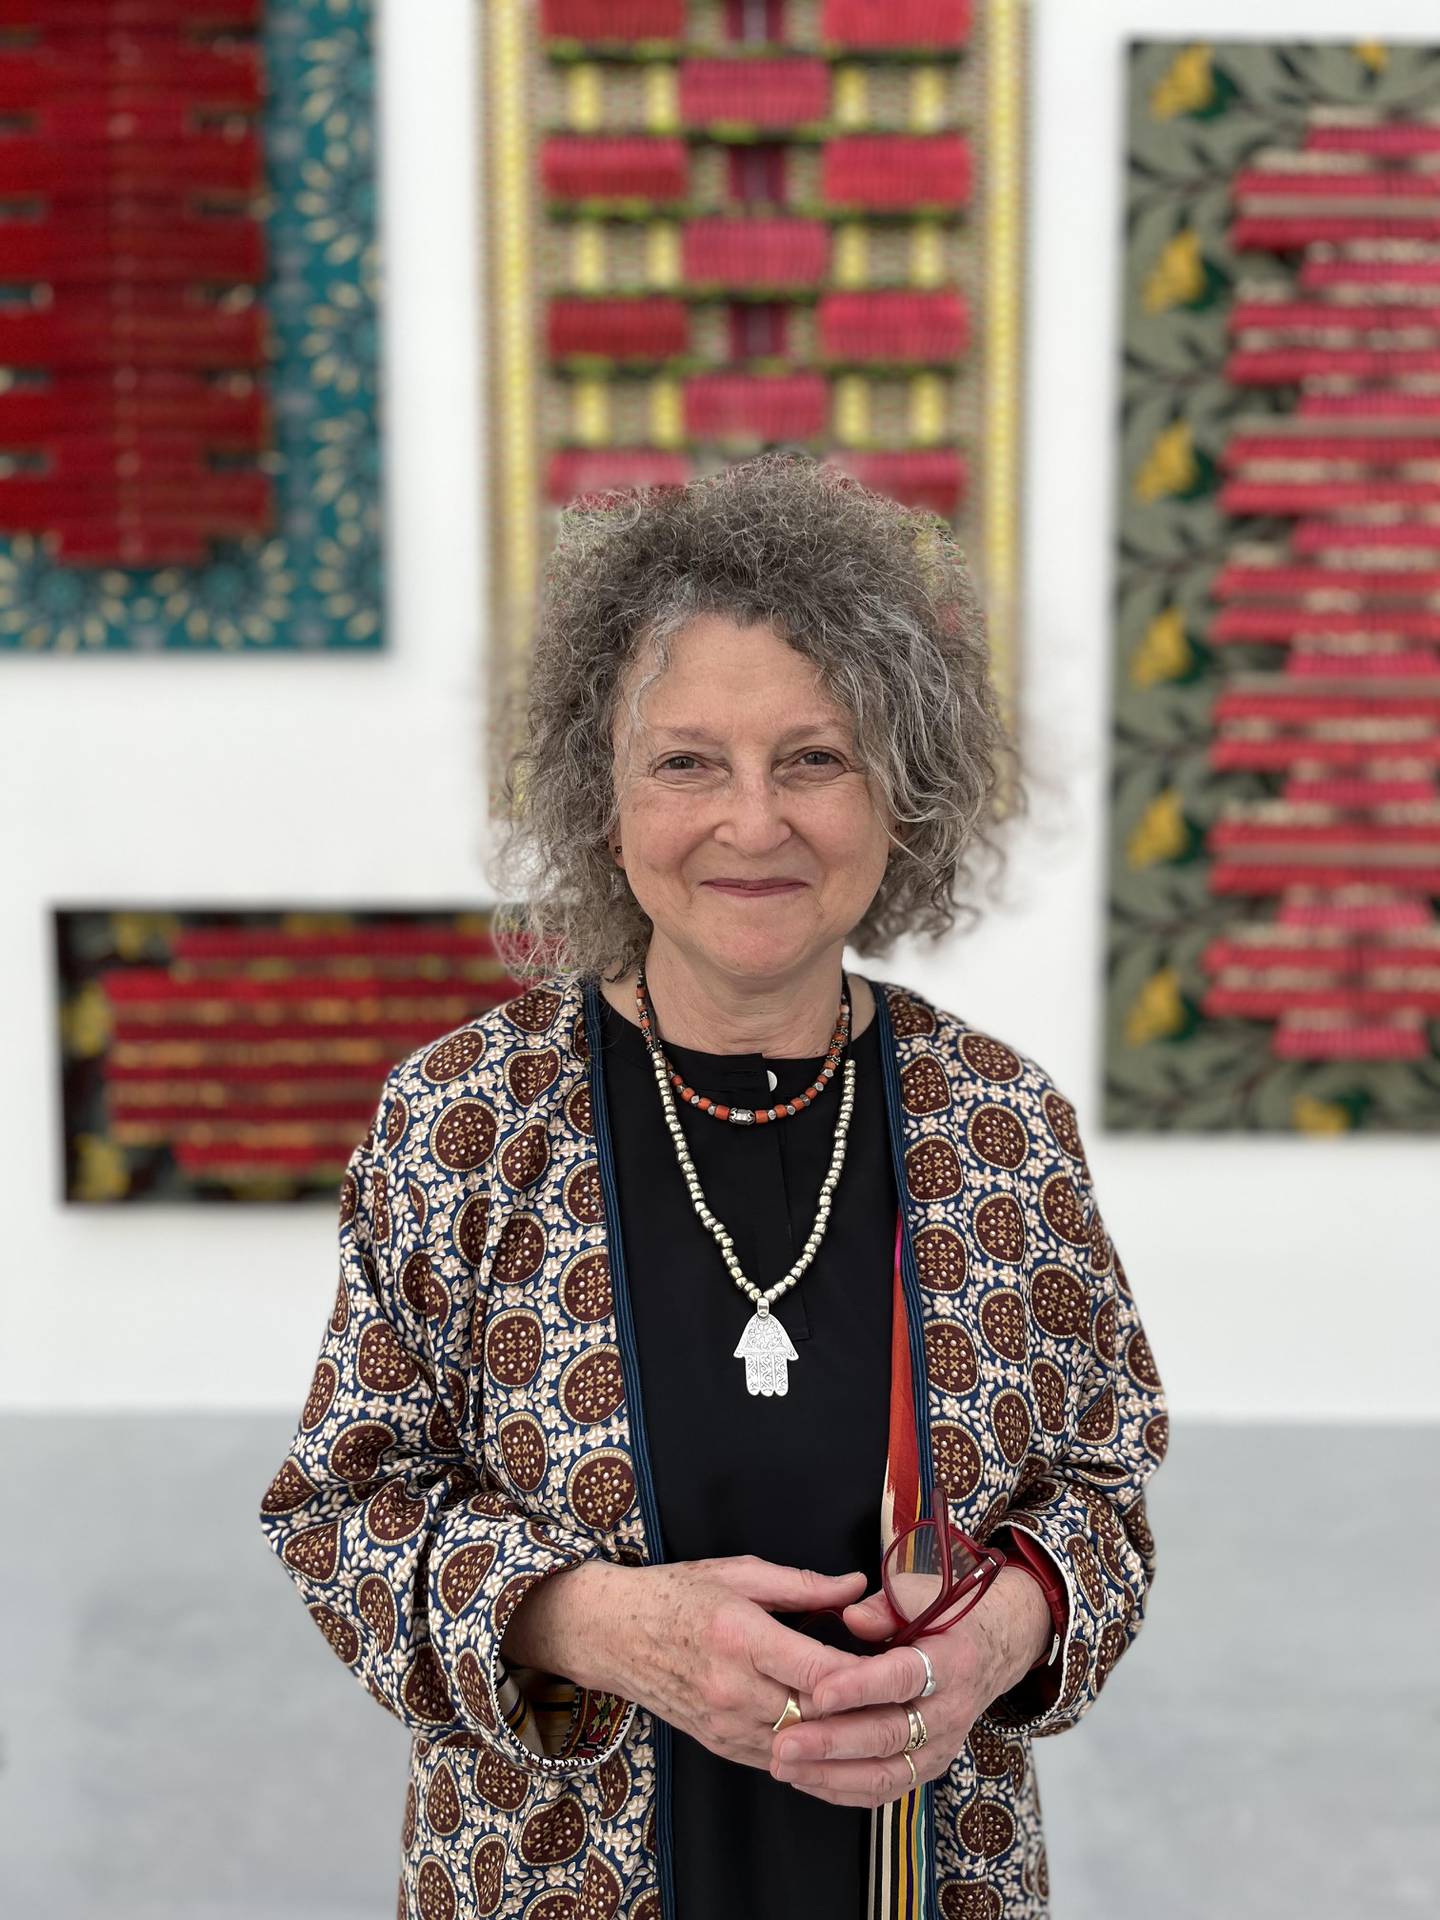 21,39 curator Venetia Porter in front of Bashaer Hawsawi's 'Cleansing' (2019)